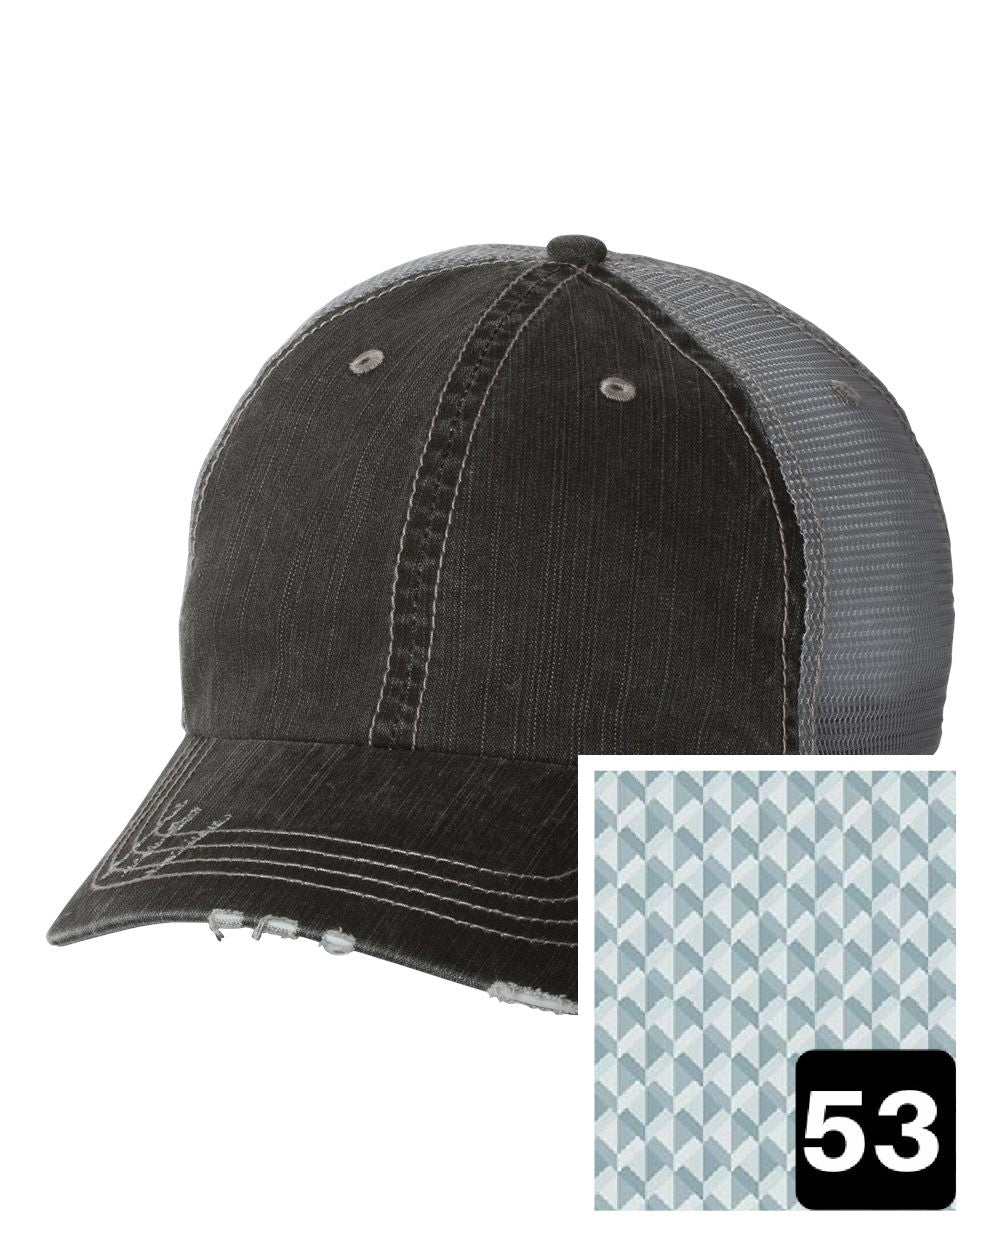 gray distressed trucker hat with multi-color stripe fabric state of Maryland